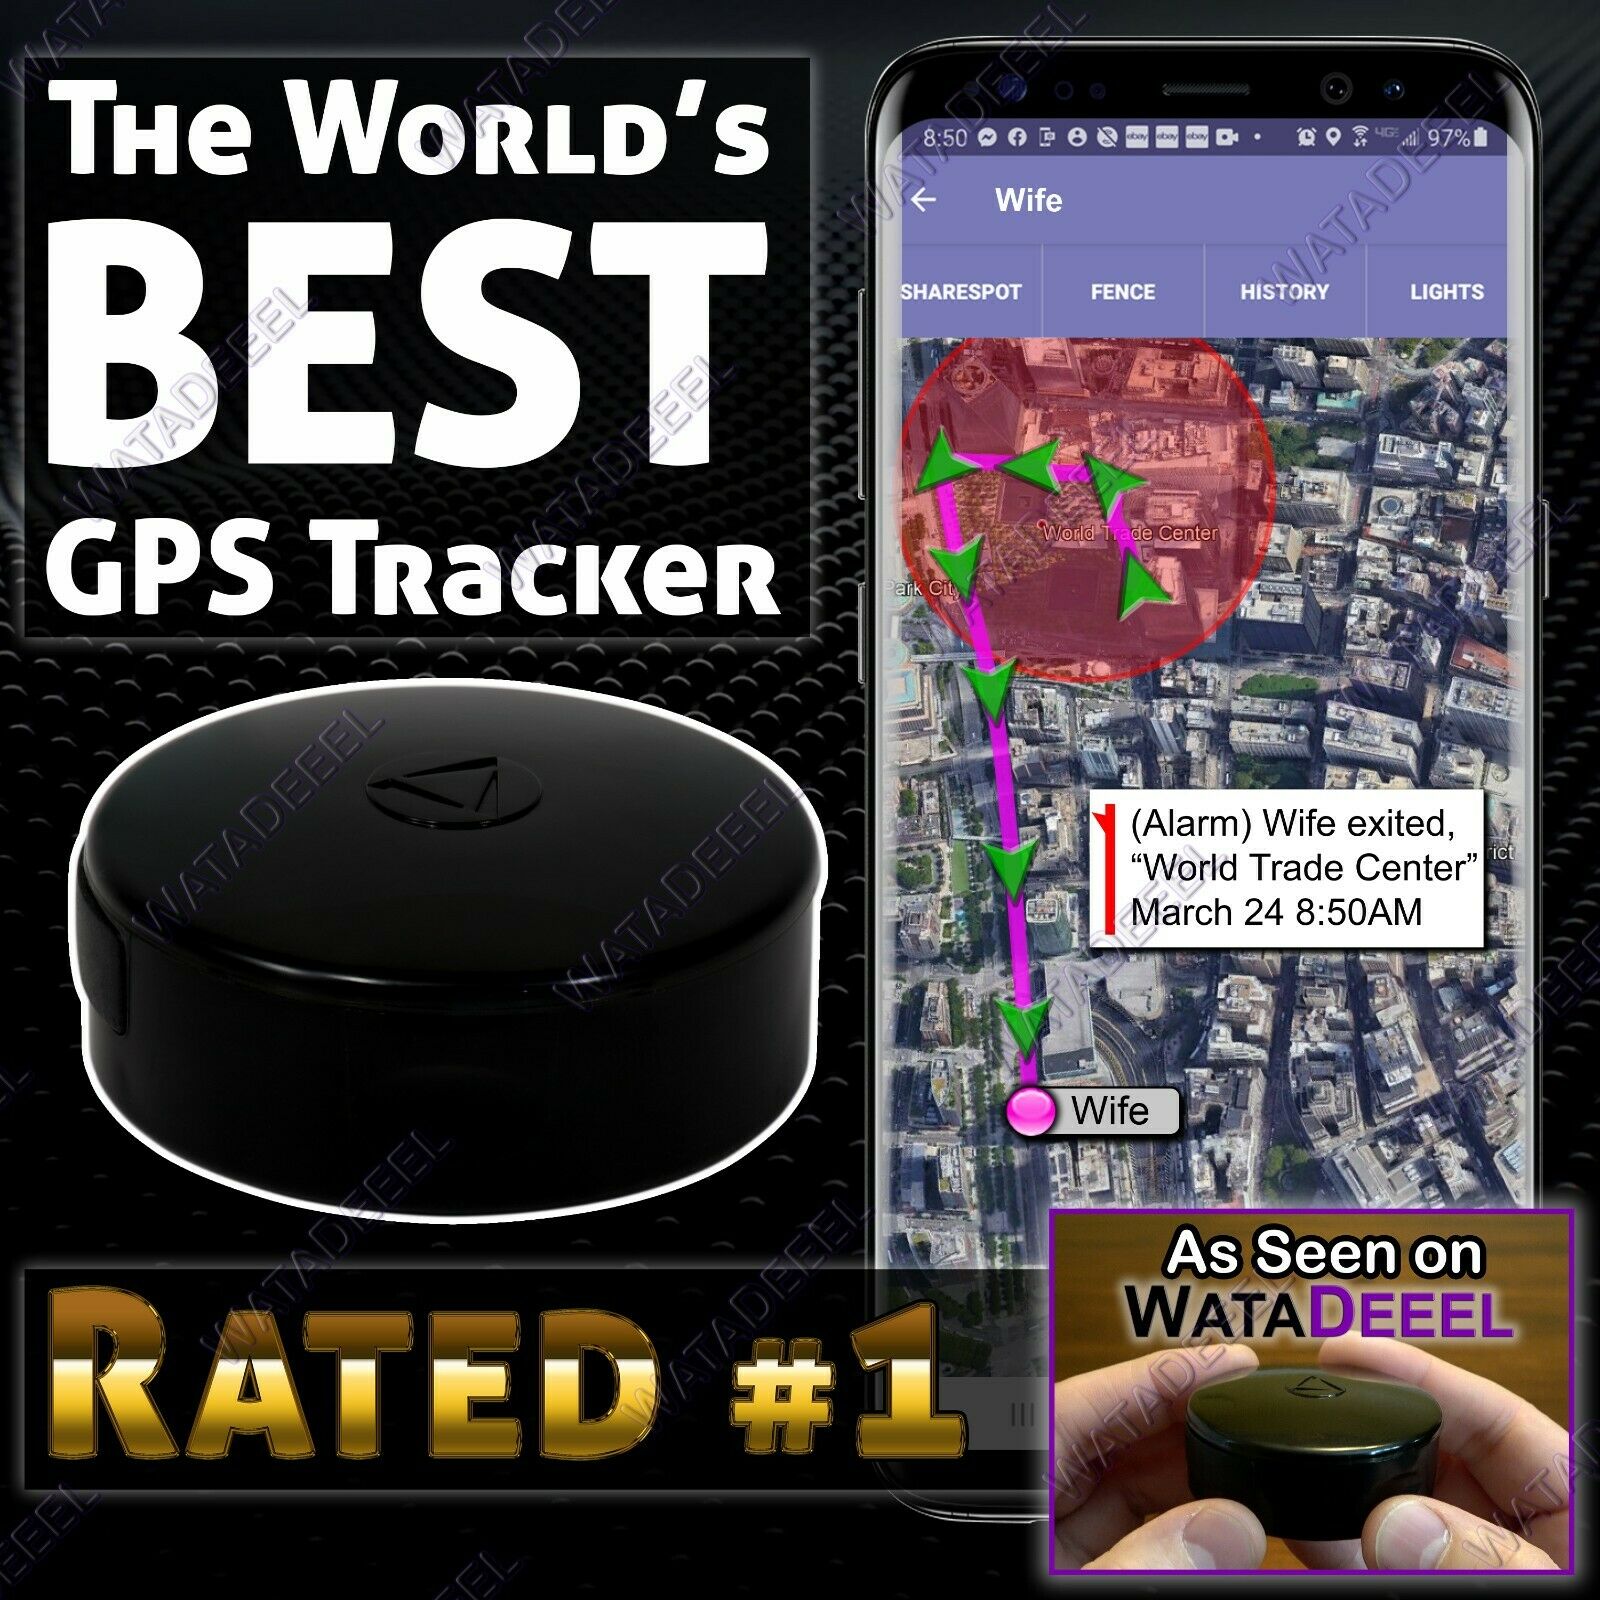 The World's Best Gps Tracker - Waterproof Vehicle Or Person Tracking Device Spy